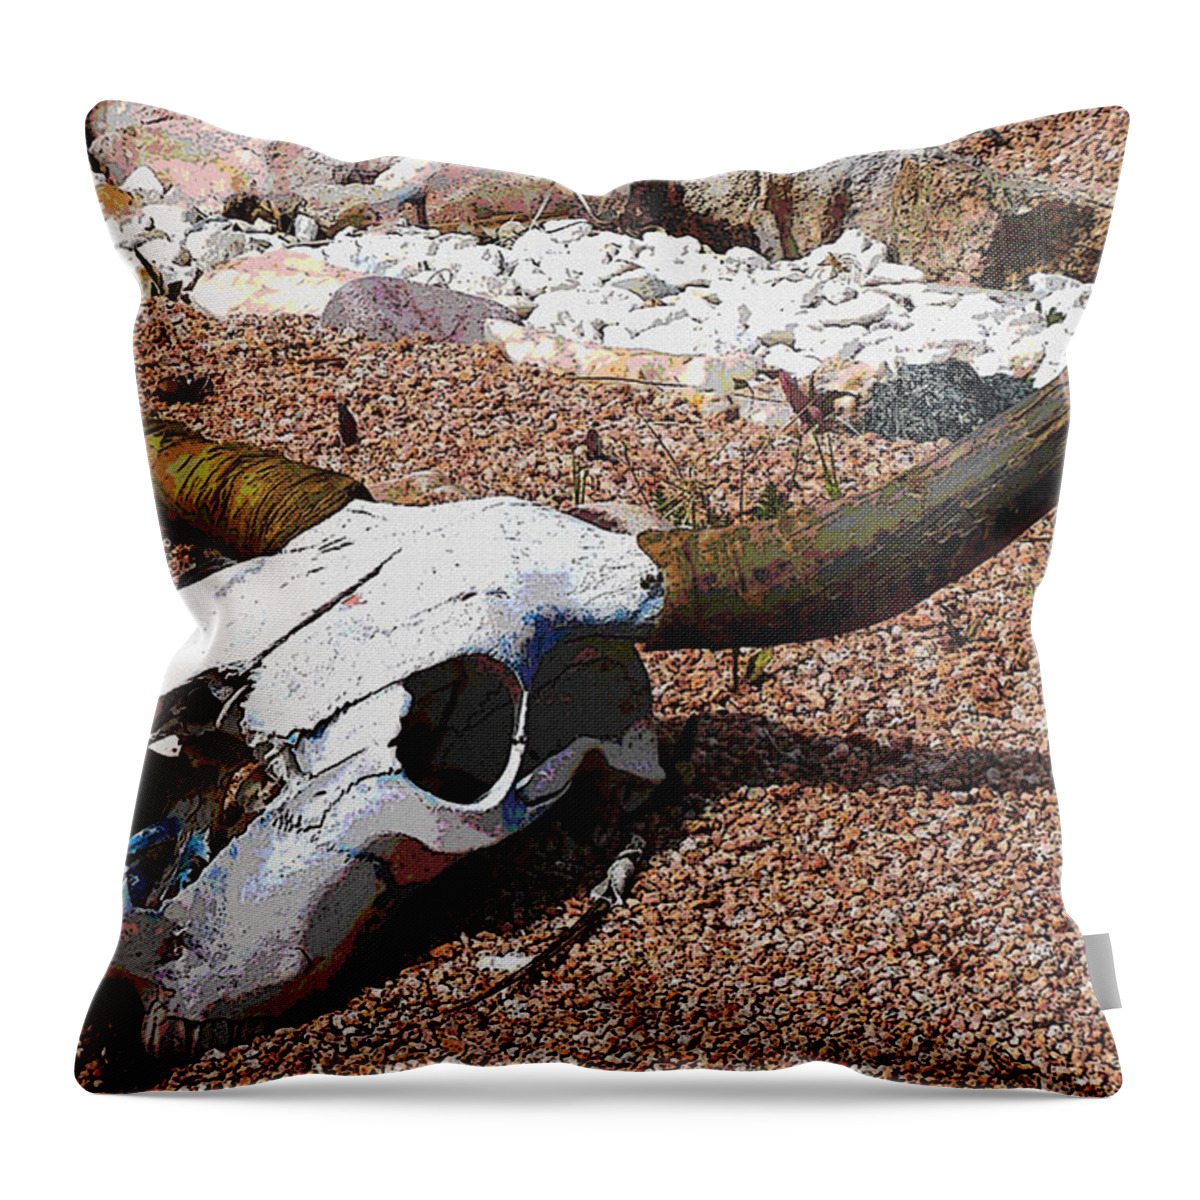 Steer Skull Throw Pillow featuring the photograph End of the Road by W James Mortensen